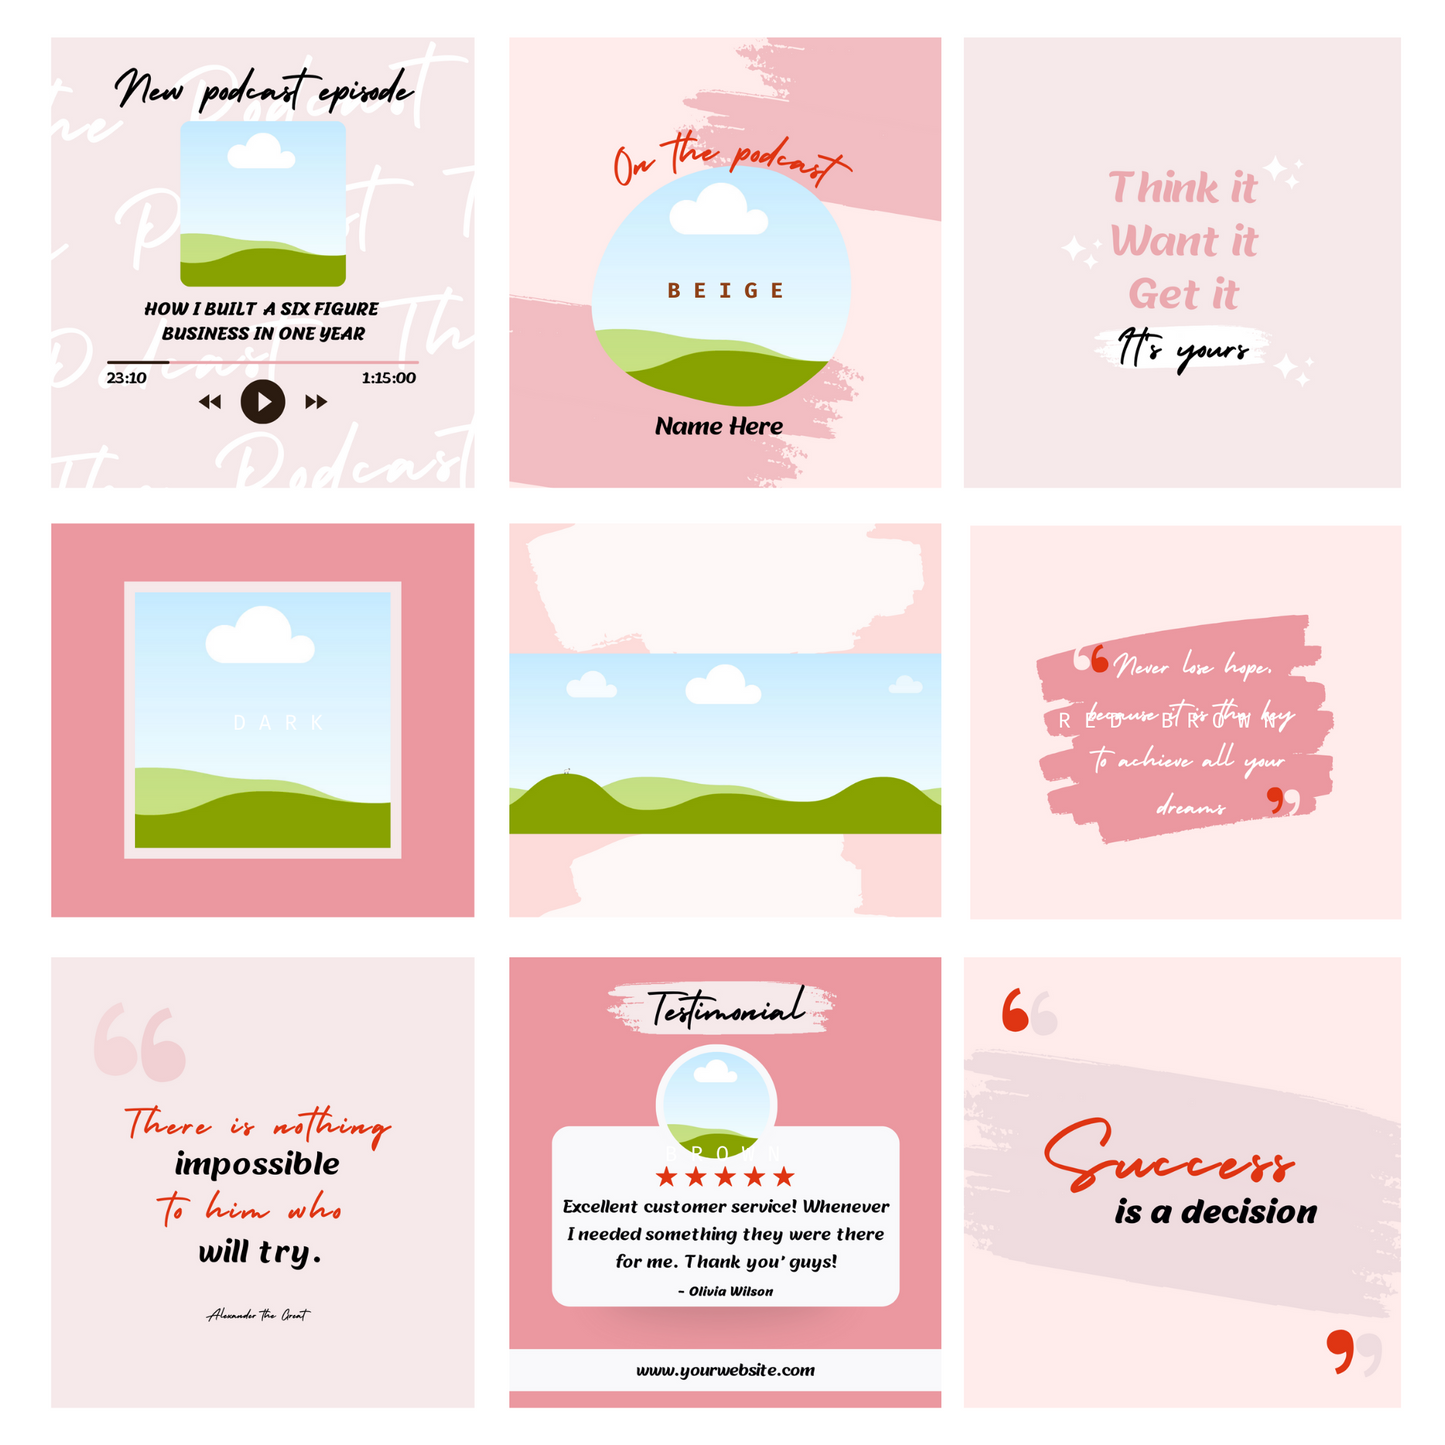 Instagram Posts Templates in Pink Canva Graphic Design, Retail, Blog, Social Media Templates, Home, Beauty, Marketing Engagement Branding